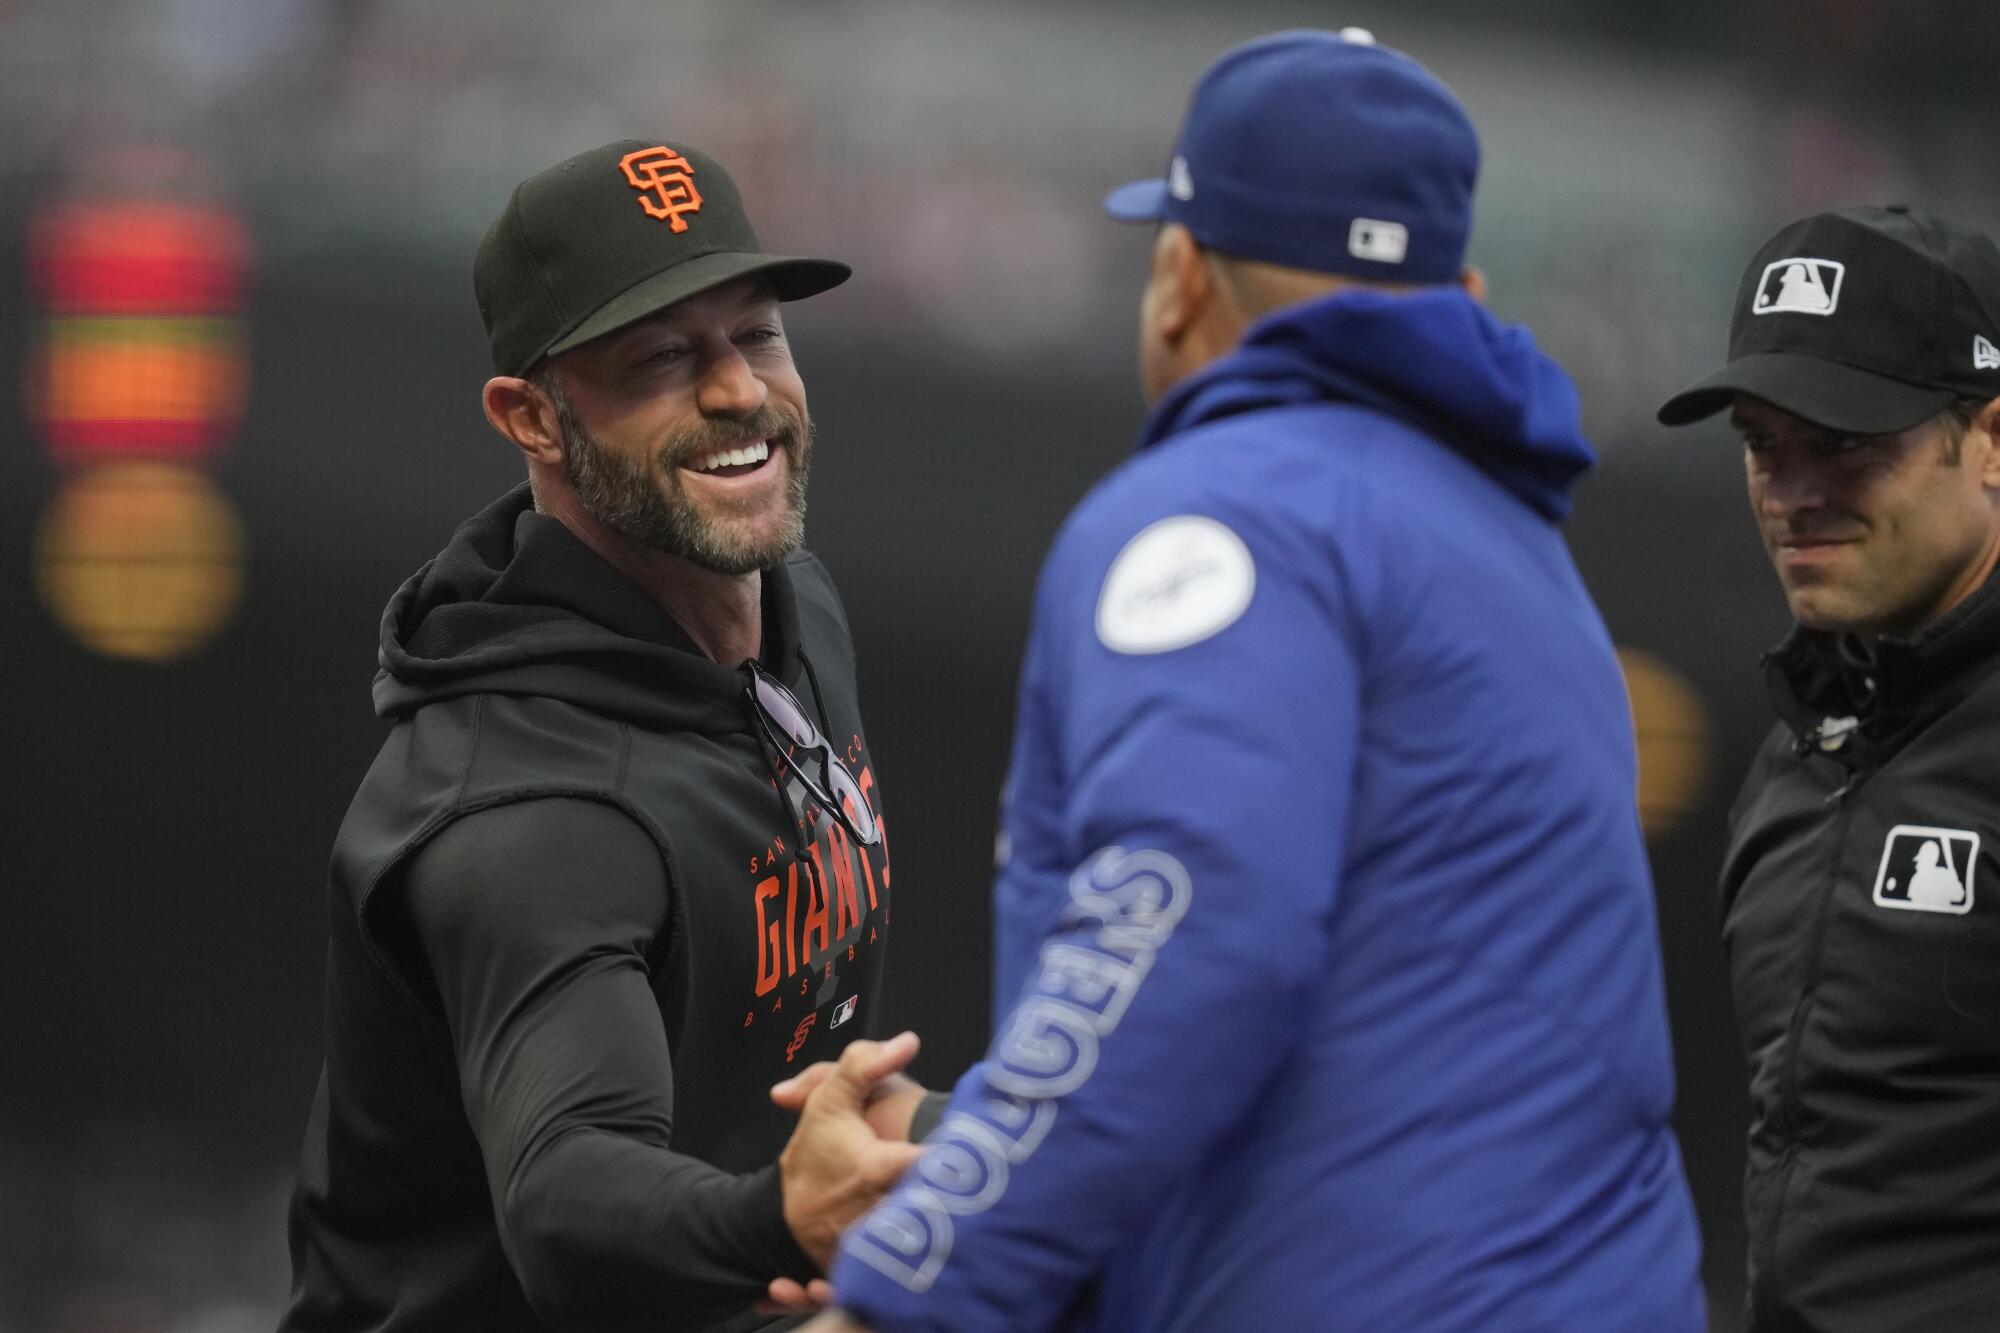 Giants manager Gabe Kapler greets Dodgers manager Dave Roberts before Monday's game in San Francisco.